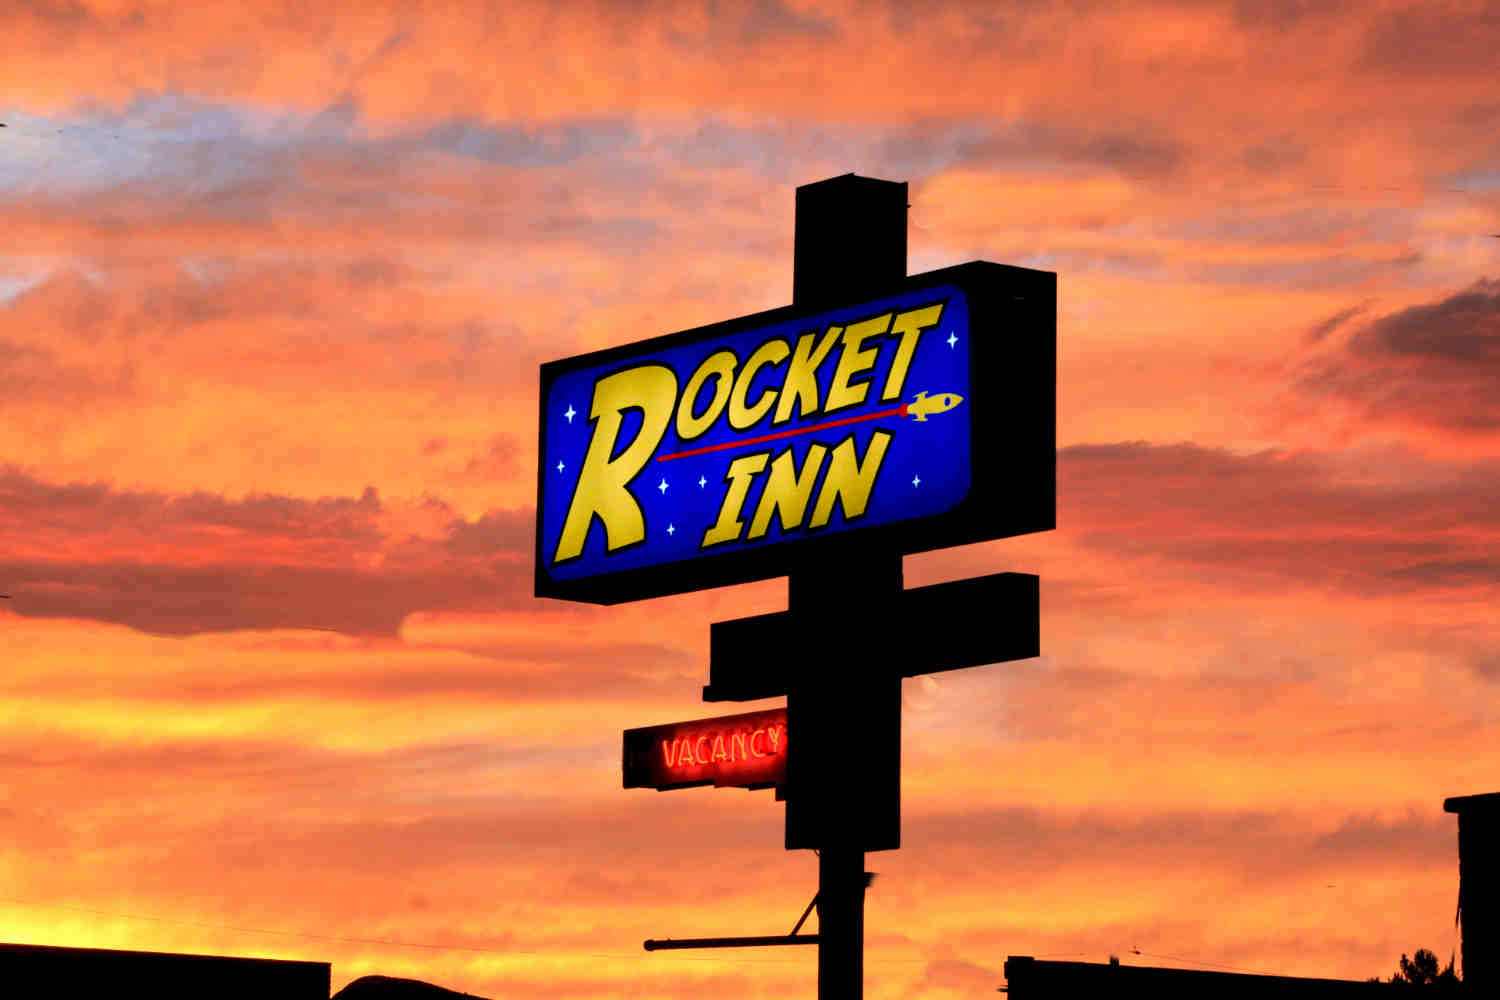 rocket inn truth or consequences